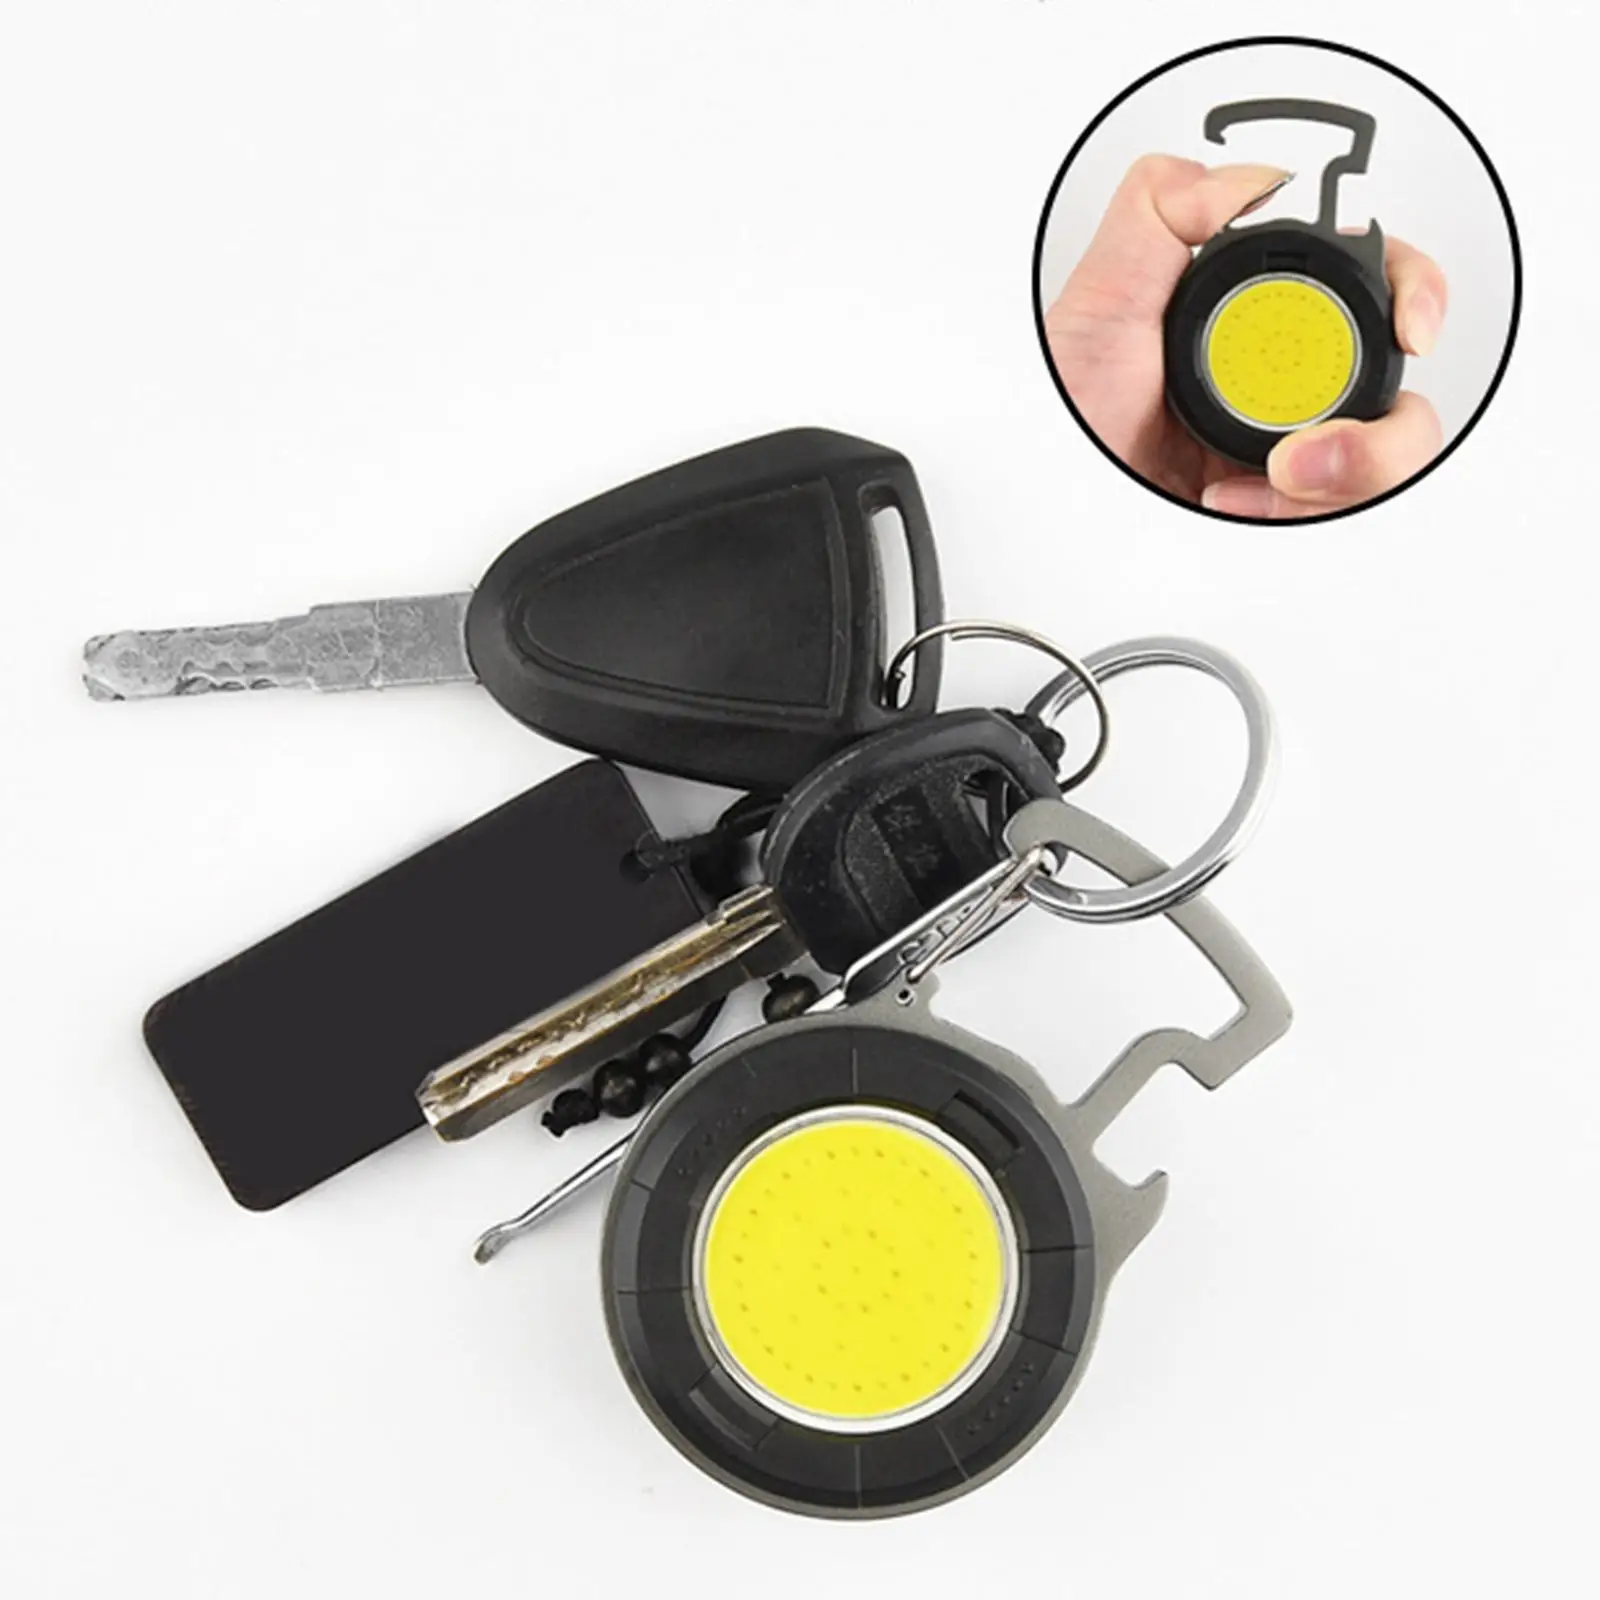 Mini COB flashlights LED Keychain Torch Bright Rechargeable Pocket Light for Emergency Outdoor Activities Night Running Fishing